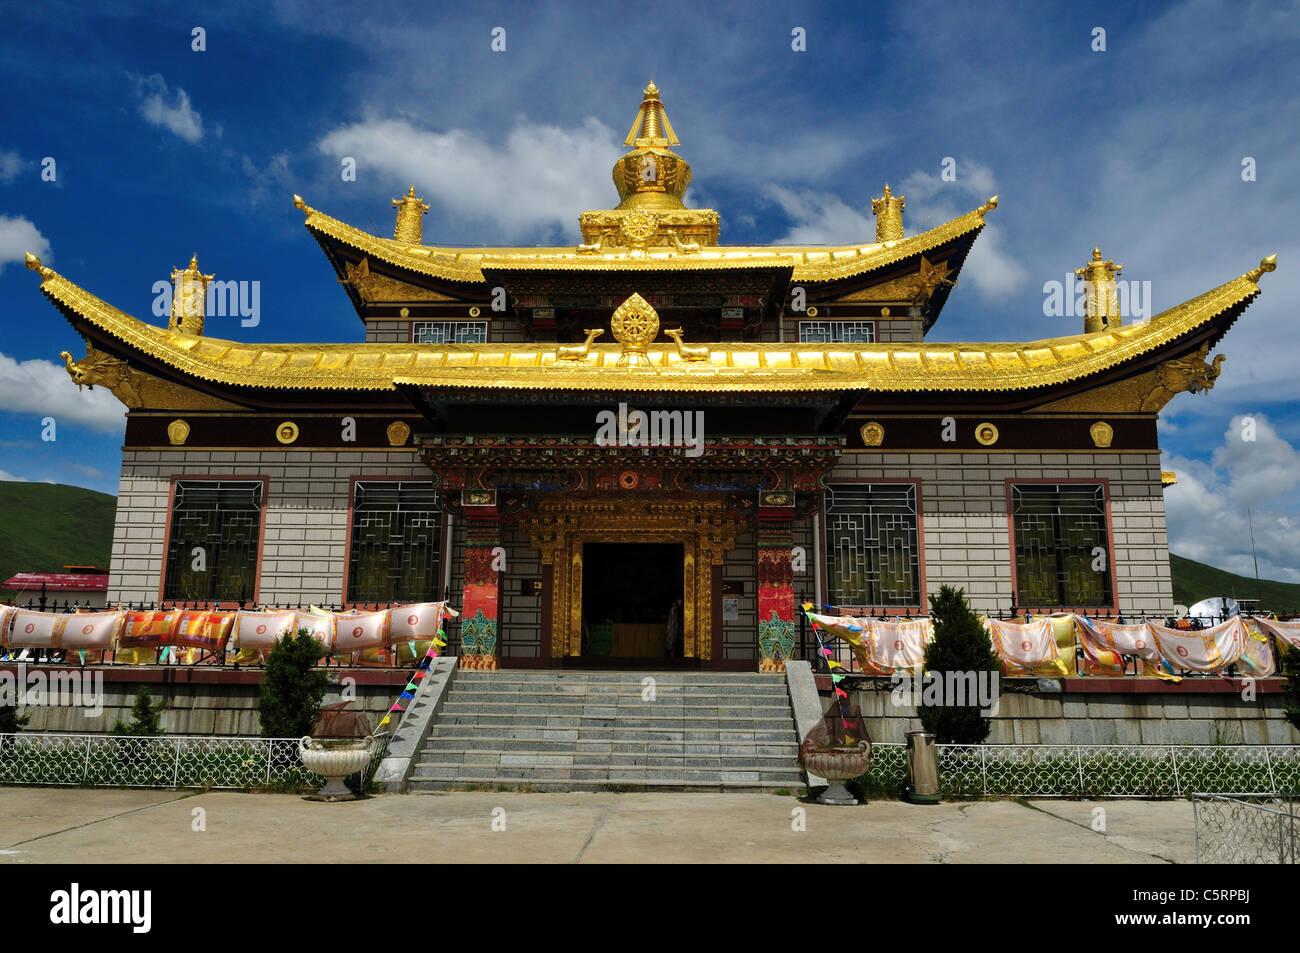 Tibetan Buddhist temple with golden roof. Tagong, Sichuan, China. Stock Photo